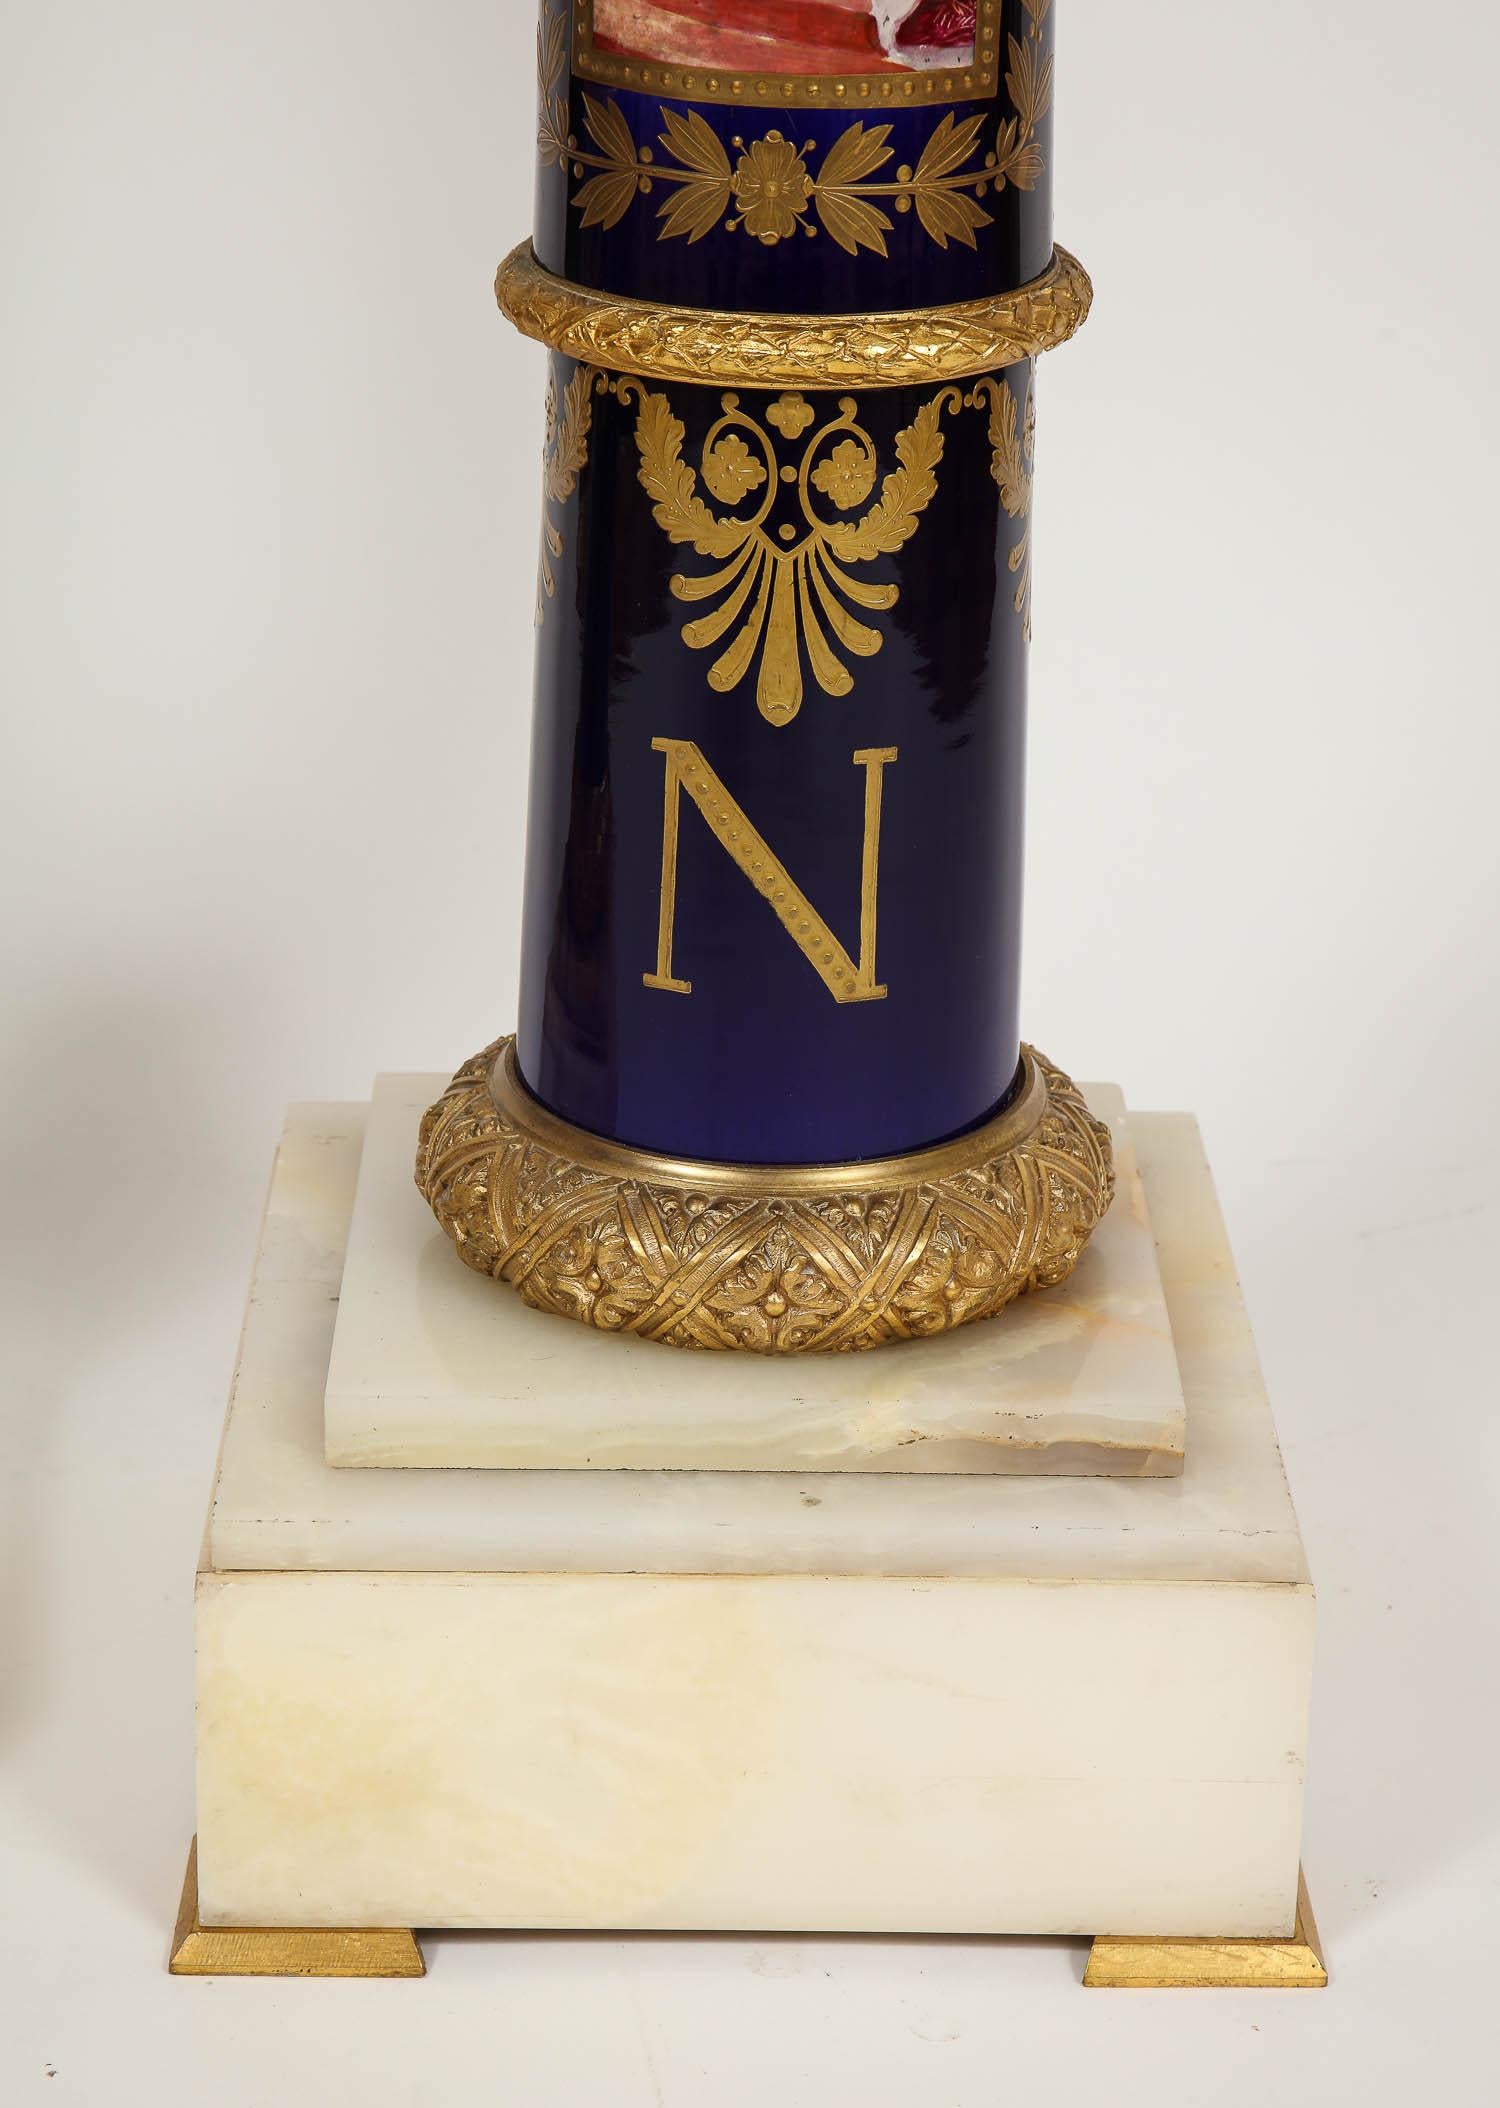 An exceptionally large and magnificent pair of French Empire Napoleonic Sèvres porcelain gilt bronze mounted pedestals. These are a exceptionally beautiful pair of 19th century 24-karat raised gold decorated, gilt bronze-mounted, onyx and Sèvres